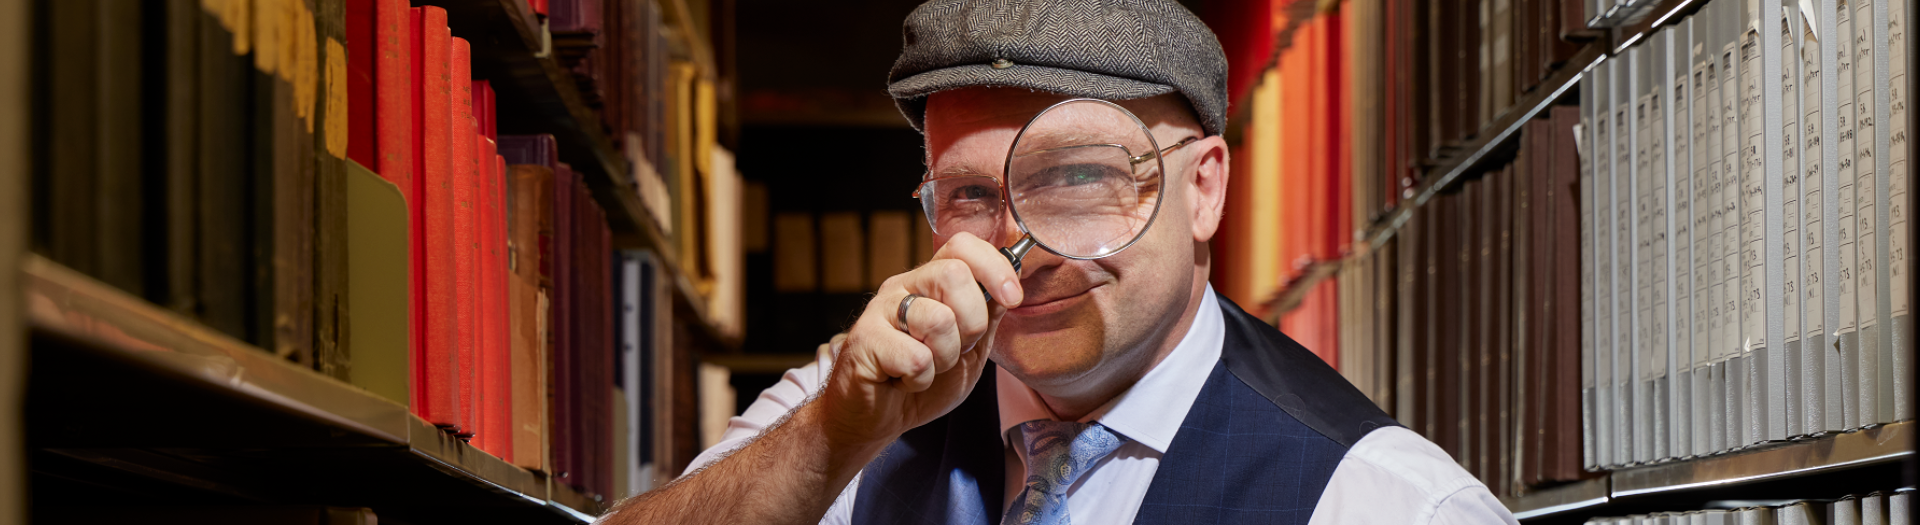 Man standing in the stacks of the Library wearing a button up shirt, tie, waistcoat, and newsboy cap holding a magnifying glass up to his eye with his right hand. 